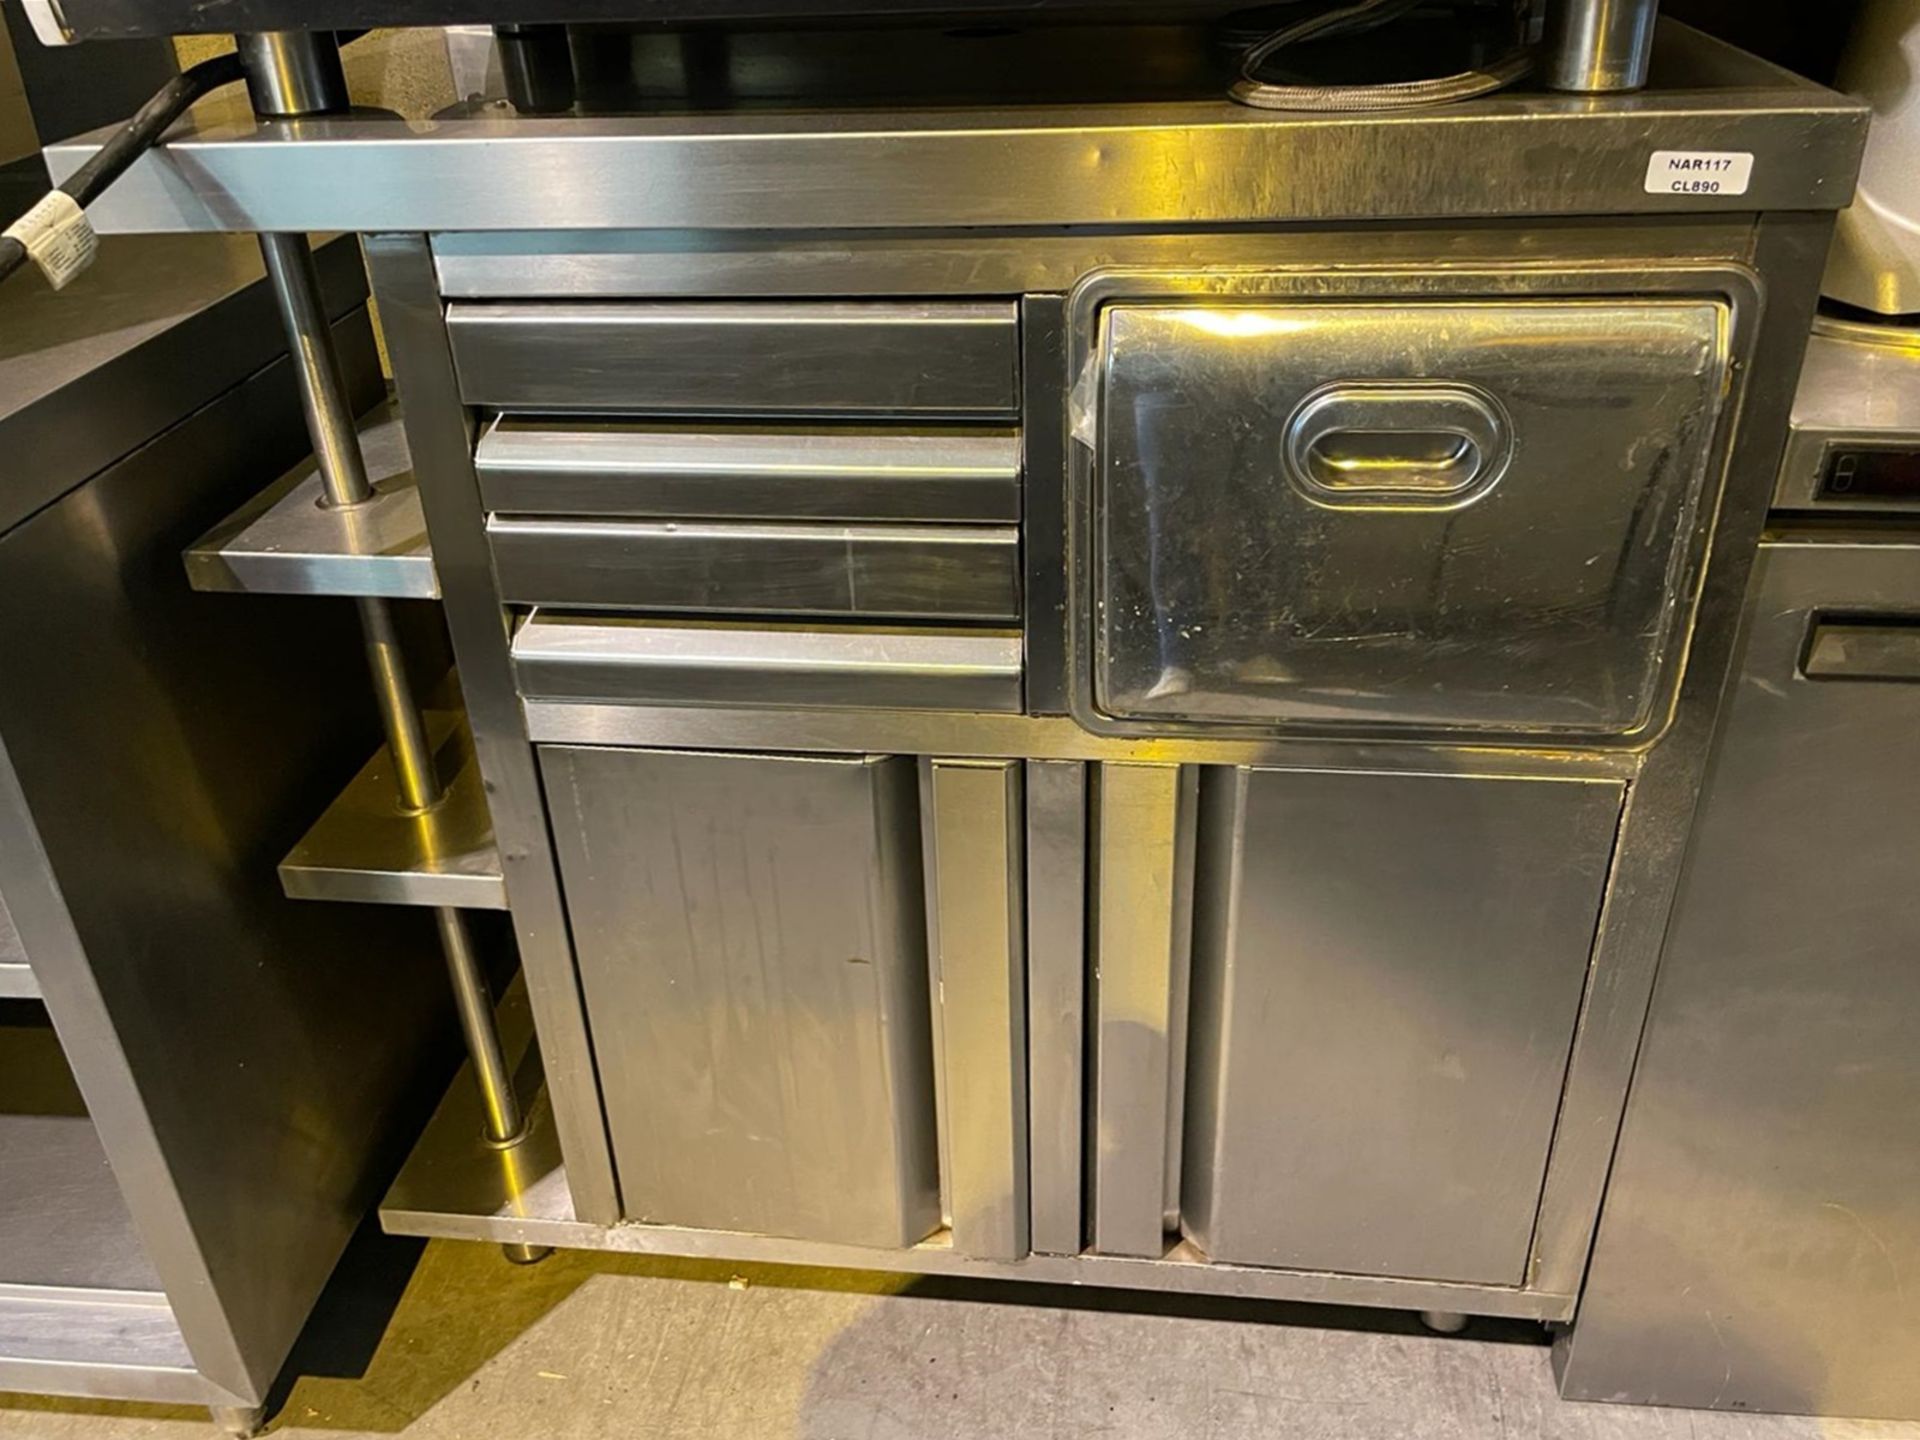 1 x Stainless Steel Backbar Counter For Coffee Machines - Approx Width: 100cms - Image 2 of 5